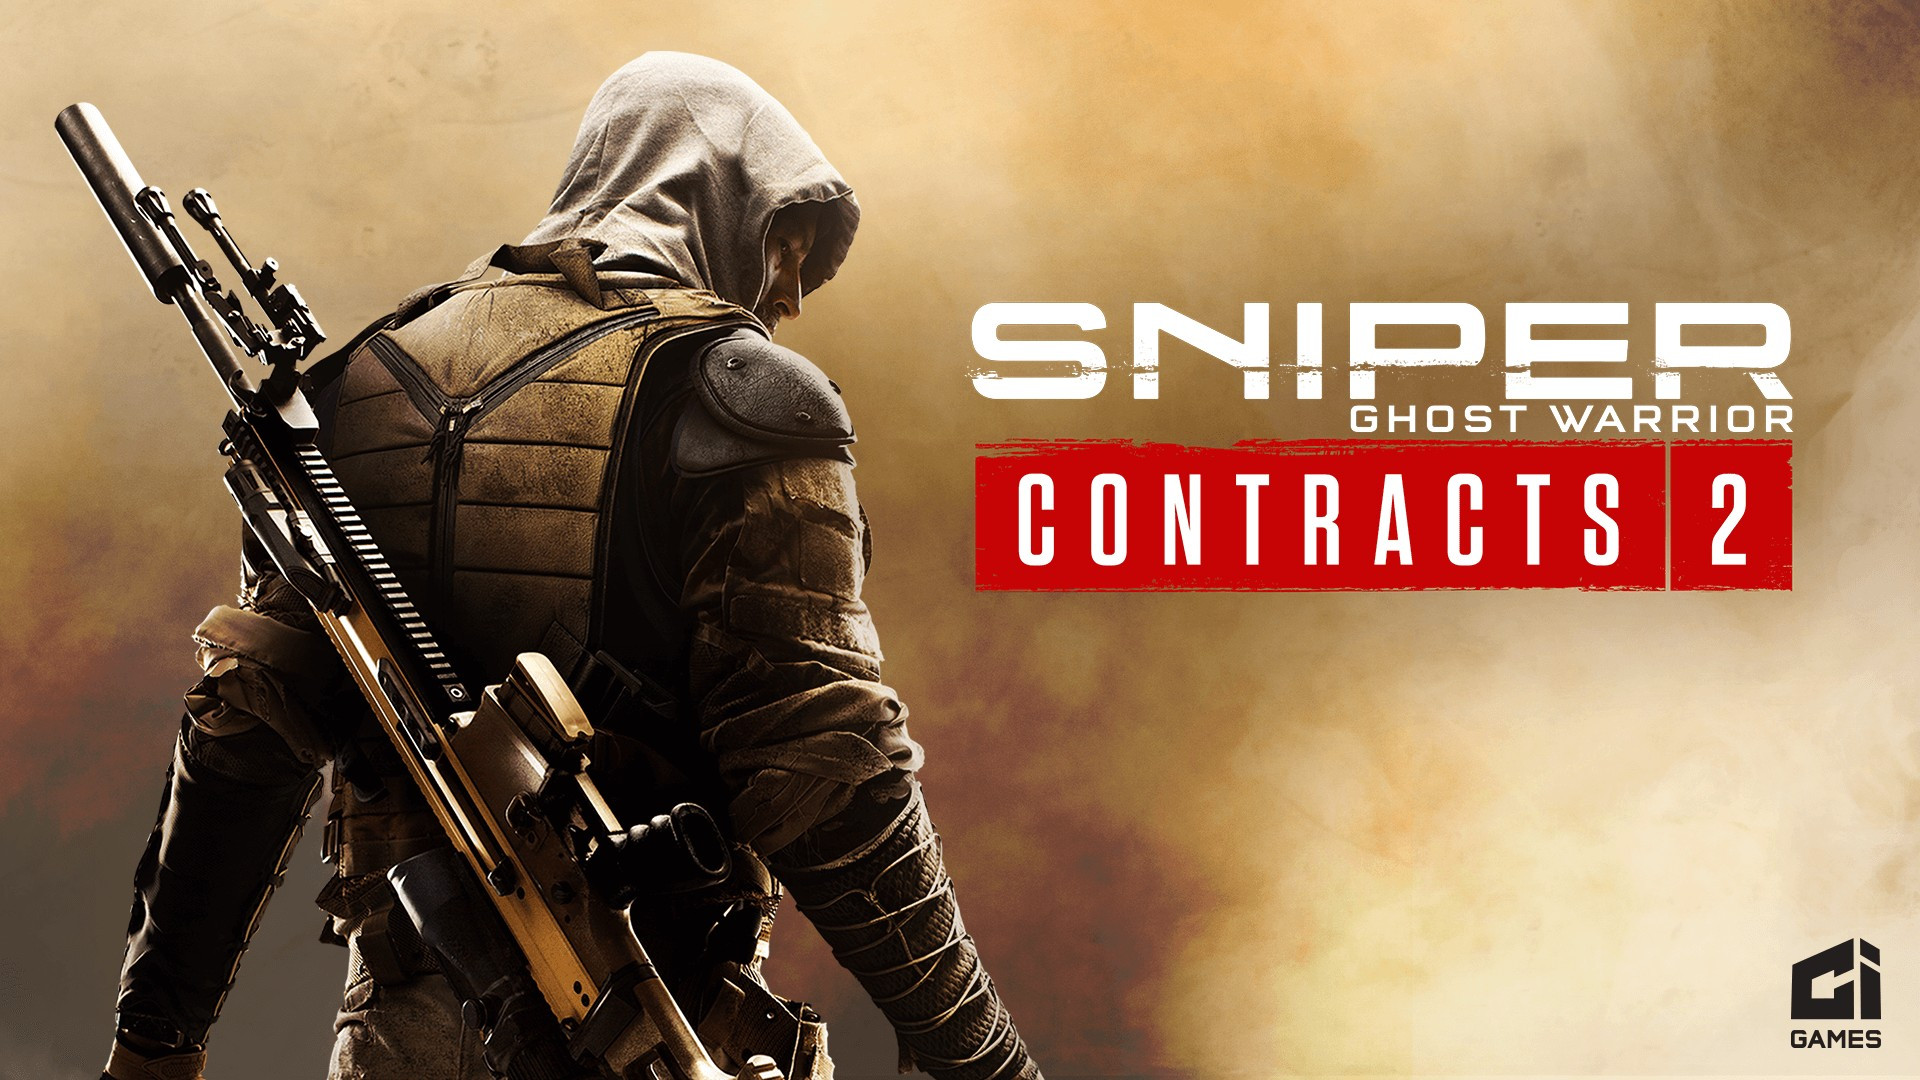 sniper ghost warrior contracts 2 xbox one allegro